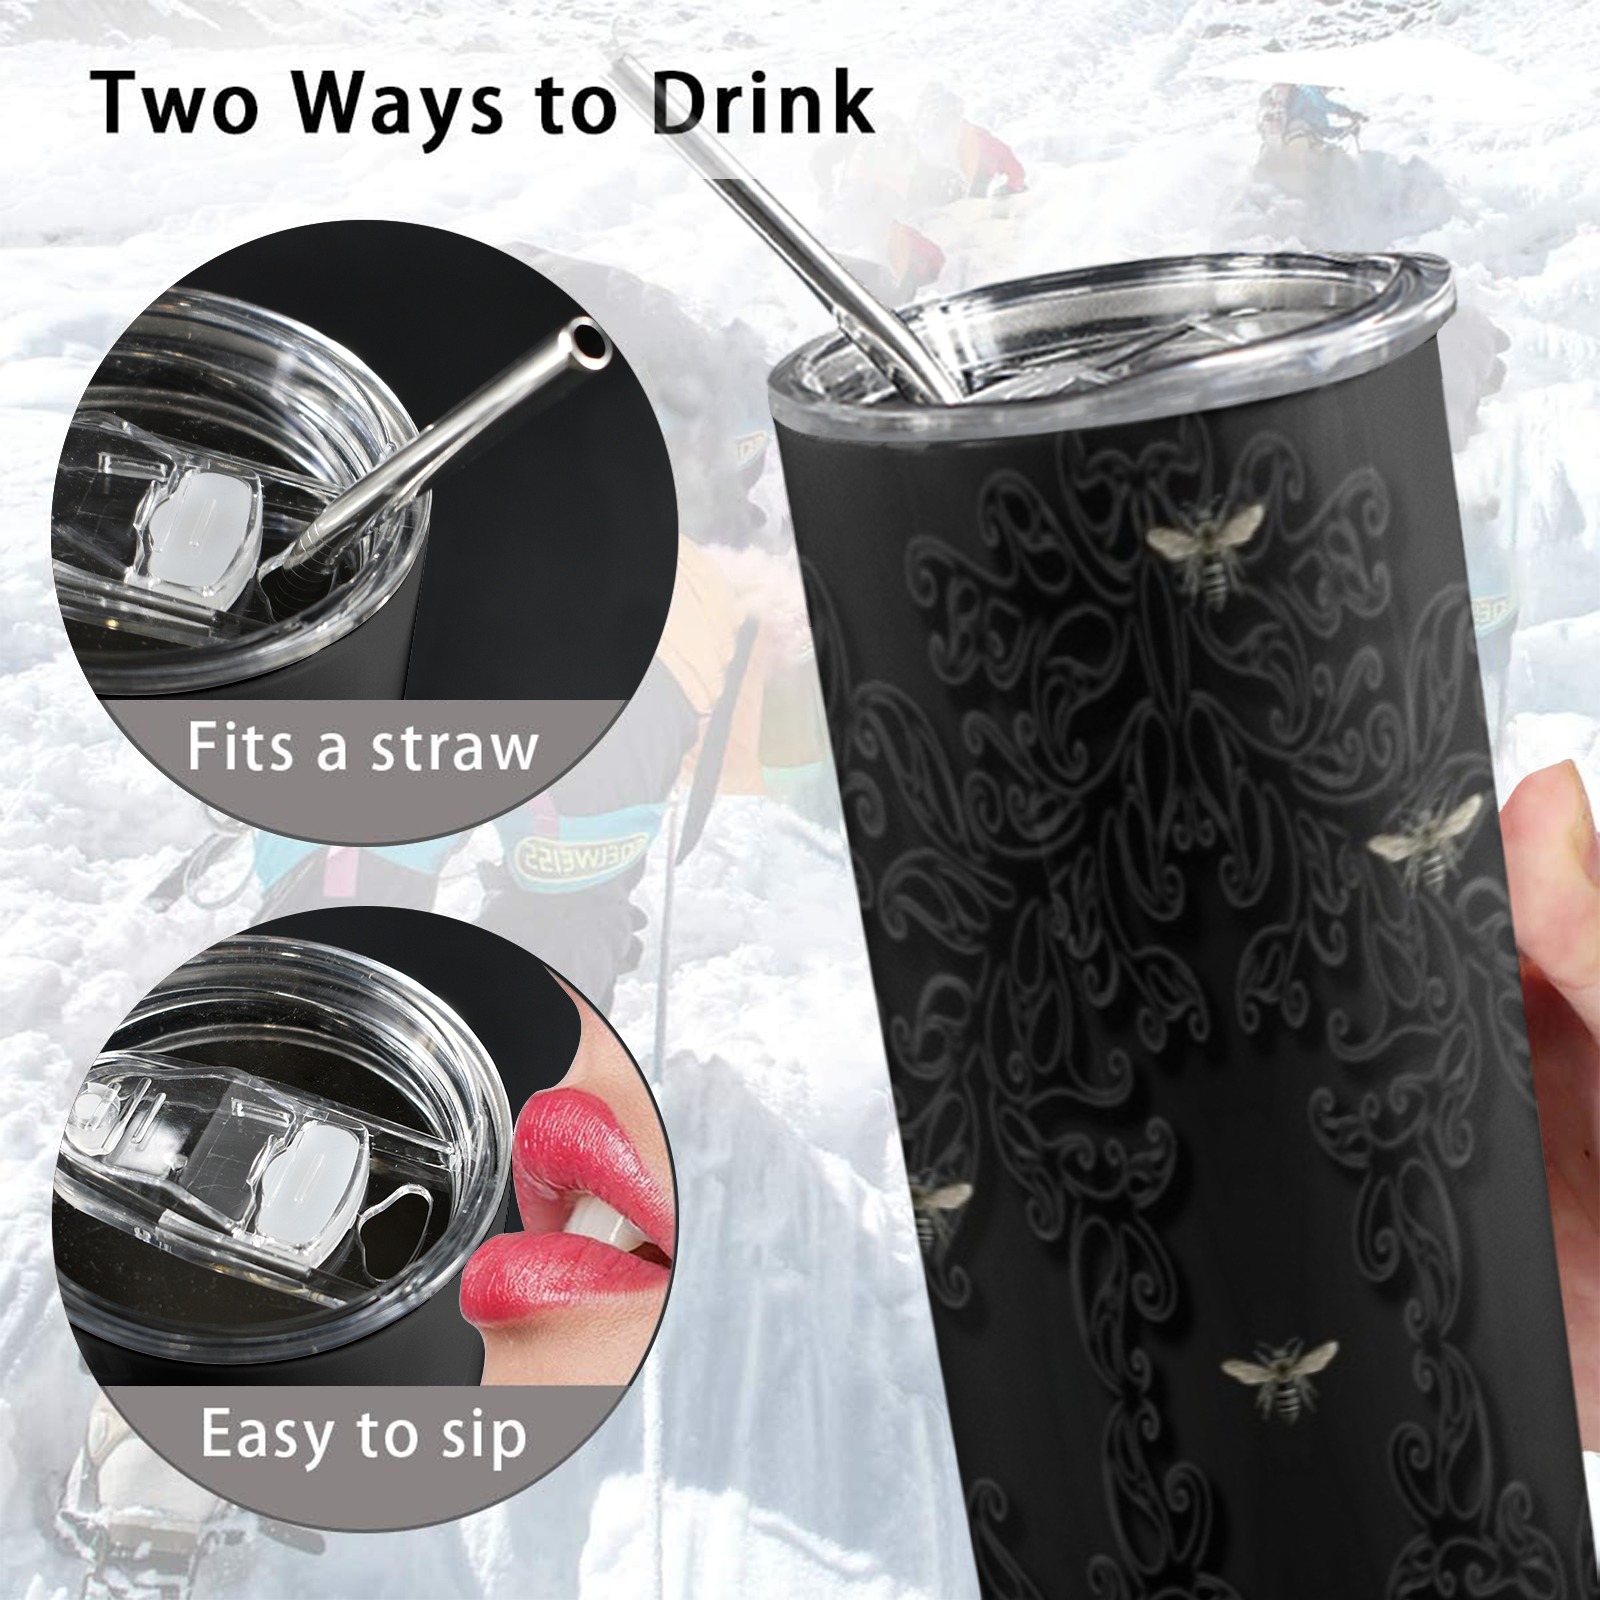 Black Bees and Lace 20oz Tall Skinny Tumbler with Lid and Straw